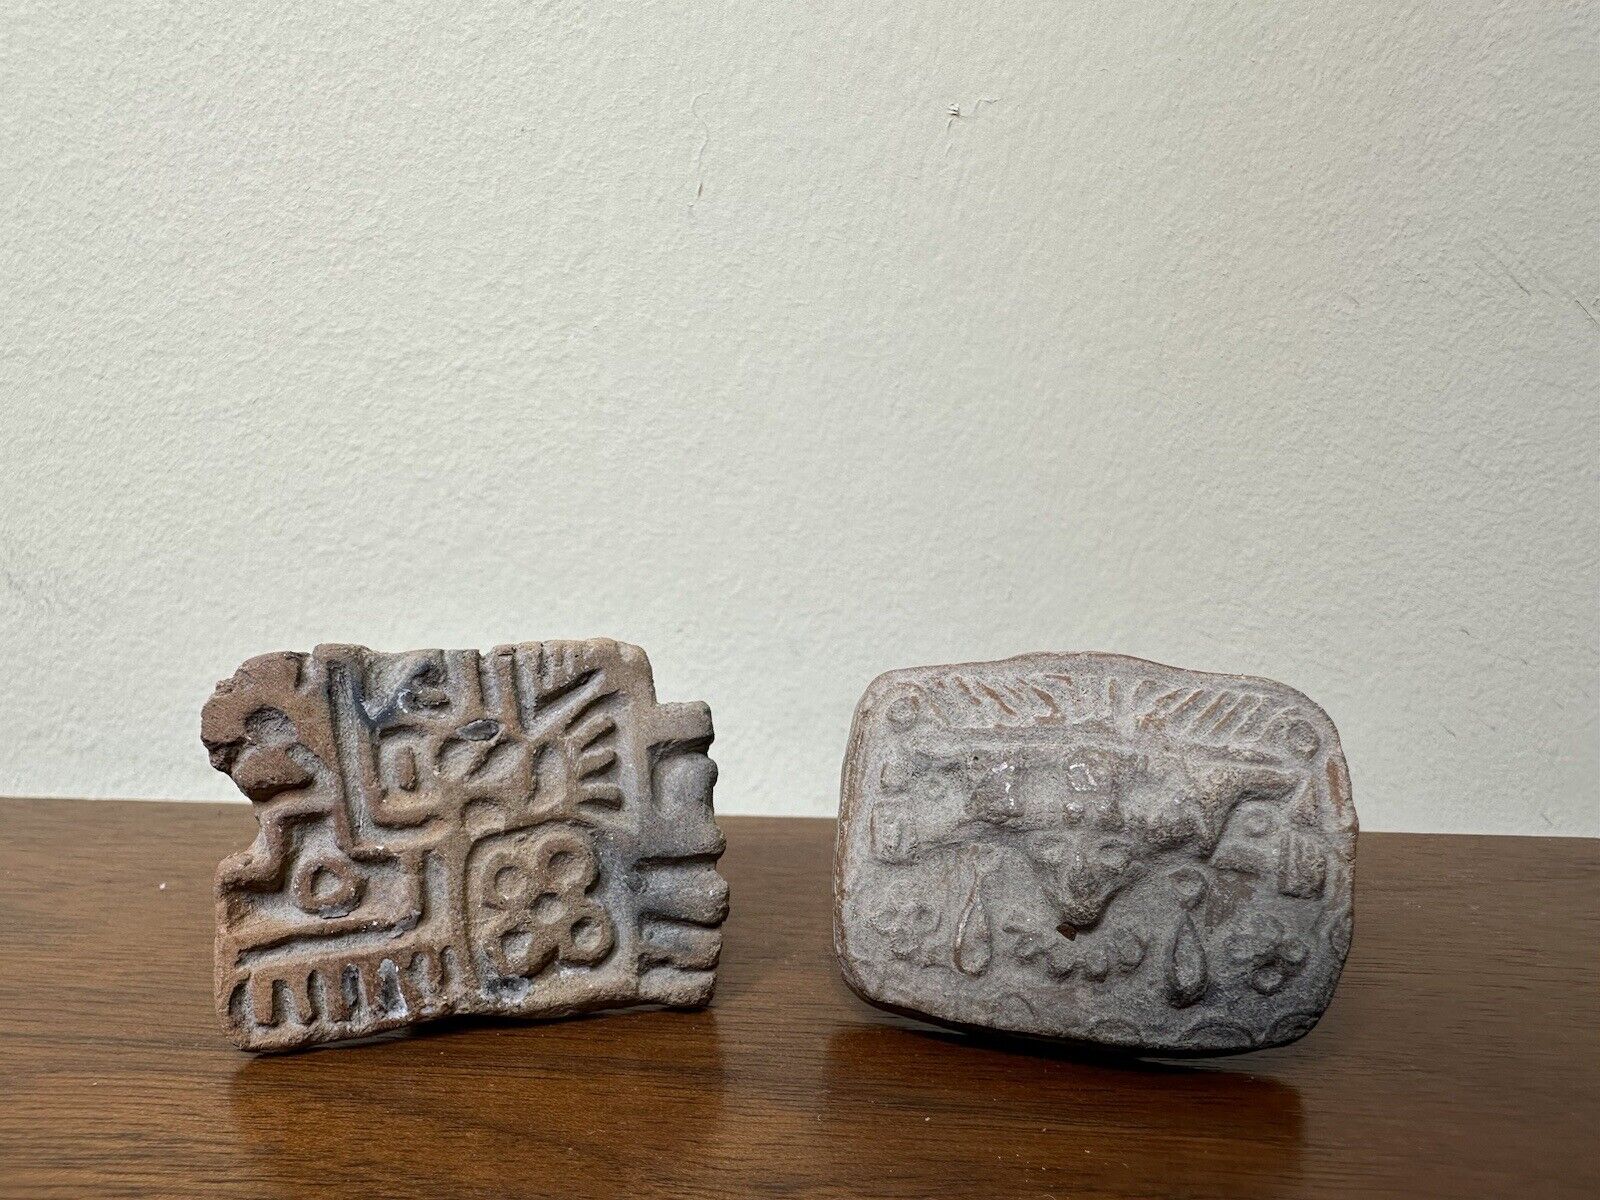 RARE Antique Pre-columbian Teotihuacan Pottery Stamp 450-650 A.D Skull & Pattern